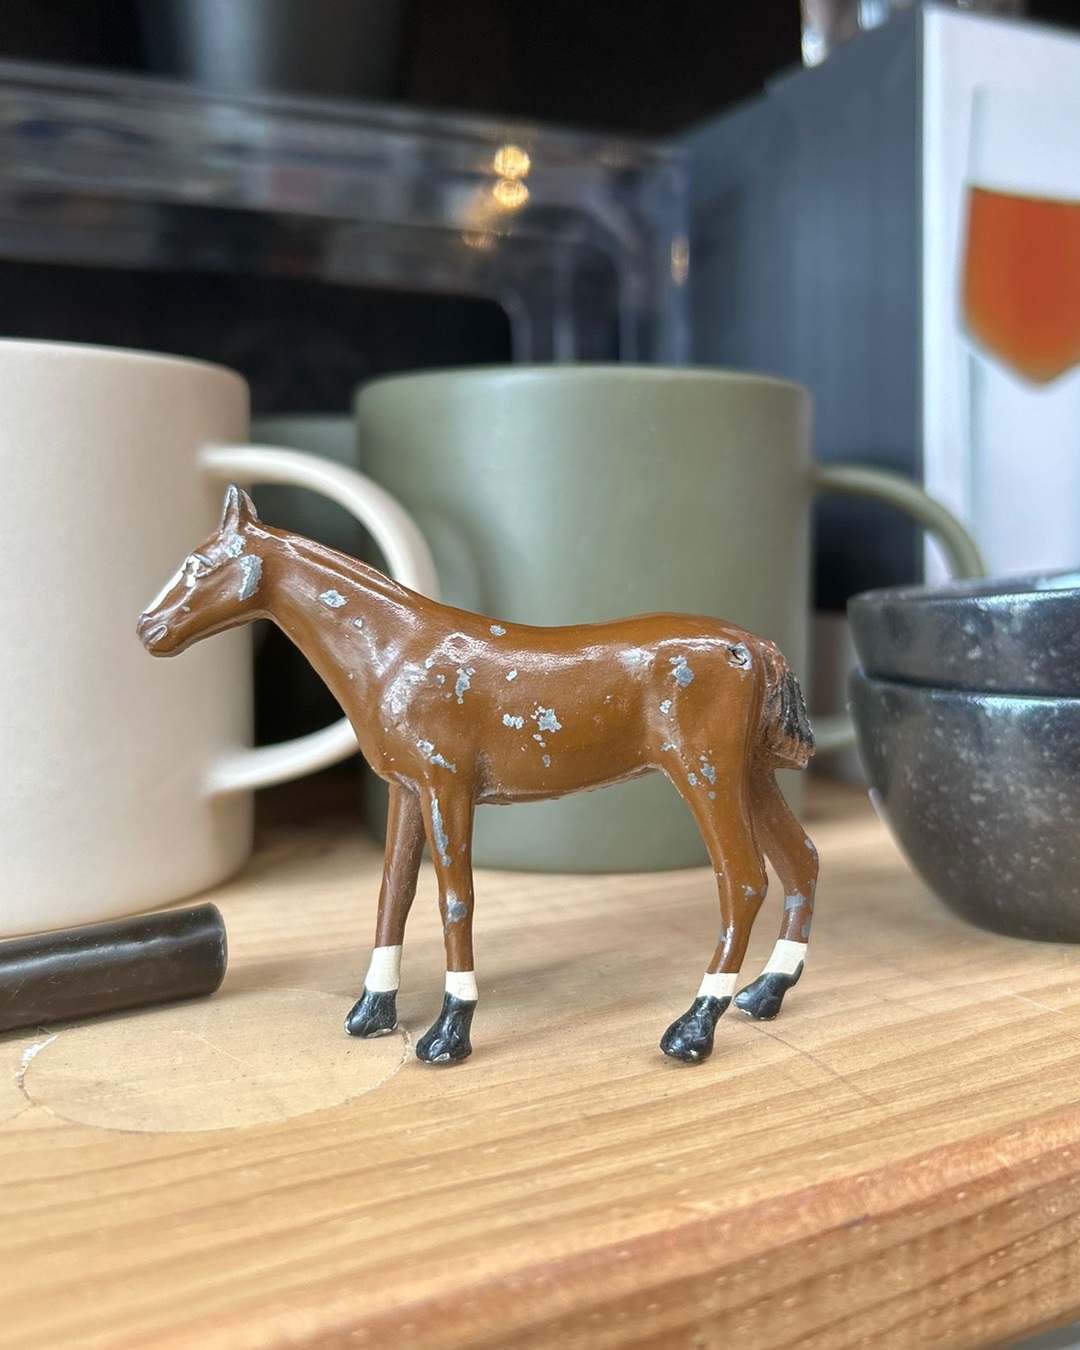 Miniature metal horse with white socks on wooden shelf